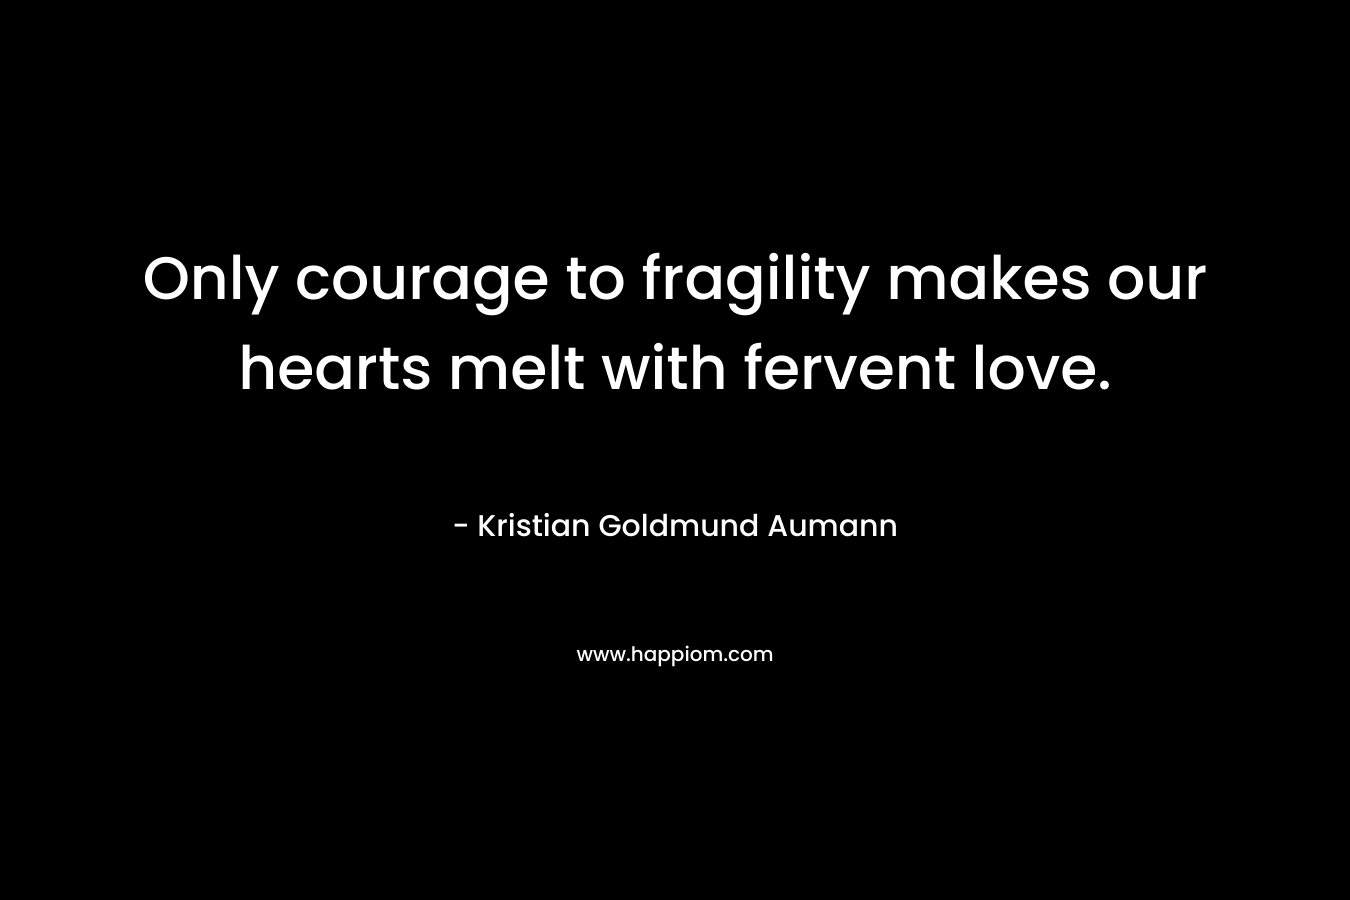 Only courage to fragility makes our hearts melt with fervent love. – Kristian Goldmund Aumann